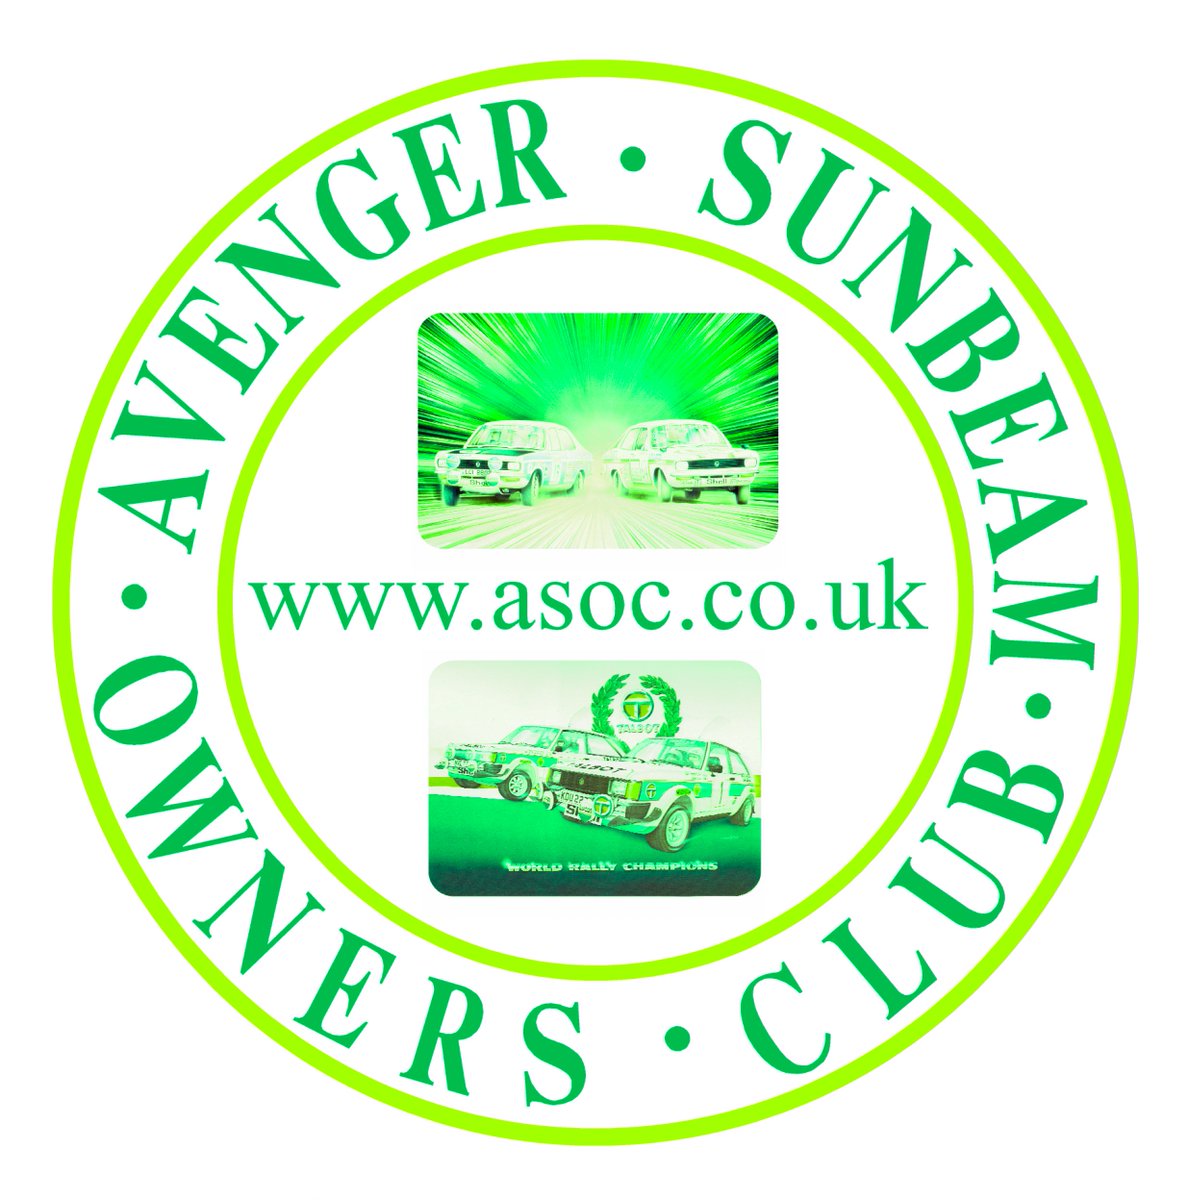 We have gone green and will no longer use polybags to post out 750 copies of ASOC News 4x a year

#sunbeamlotus #avengertiger #hillmanavenger #chrysleravenger #talbotavenger #simcasunbeam #chryslersunbeam #talbotsunbeam #plymouthcricket #dodge1800 #dodgepolara #dodge1500 #vw1500